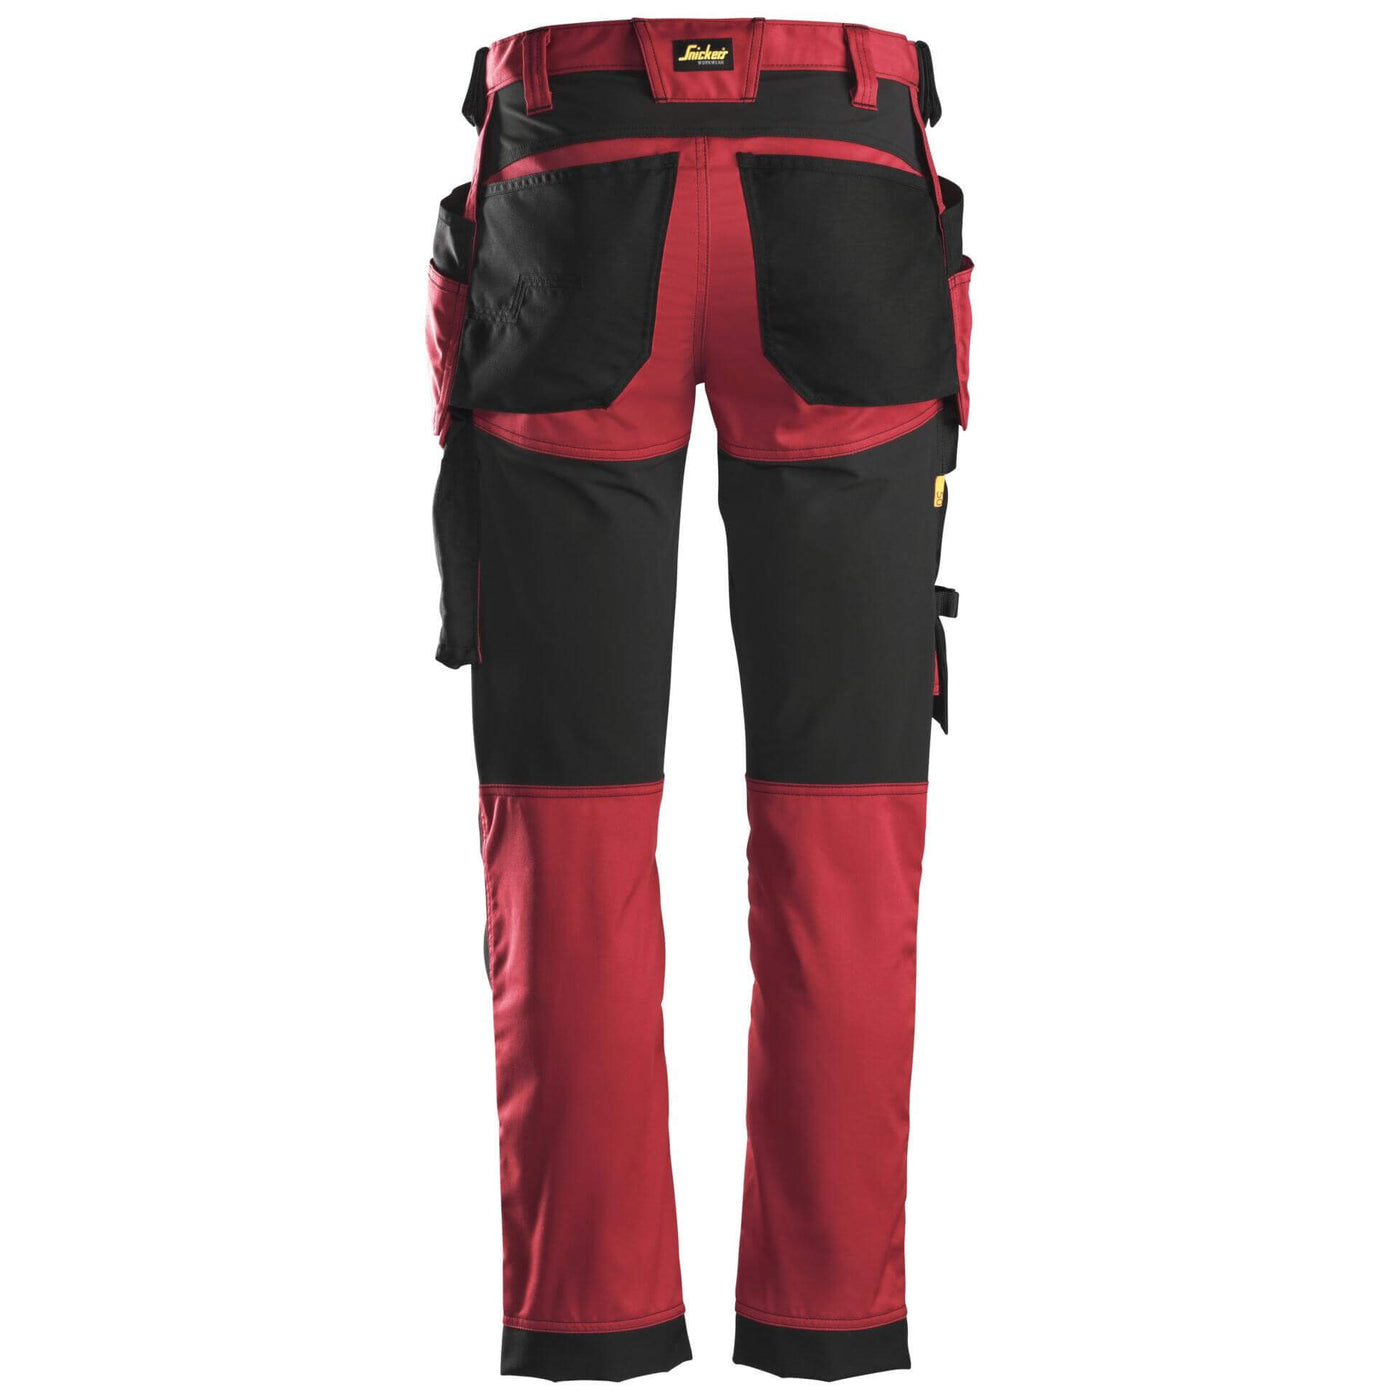 Snickers 6241 AllroundWork Slim Fit Stretch Trousers with Holster Pockets Chili Red Black back #colour_chili-red-black